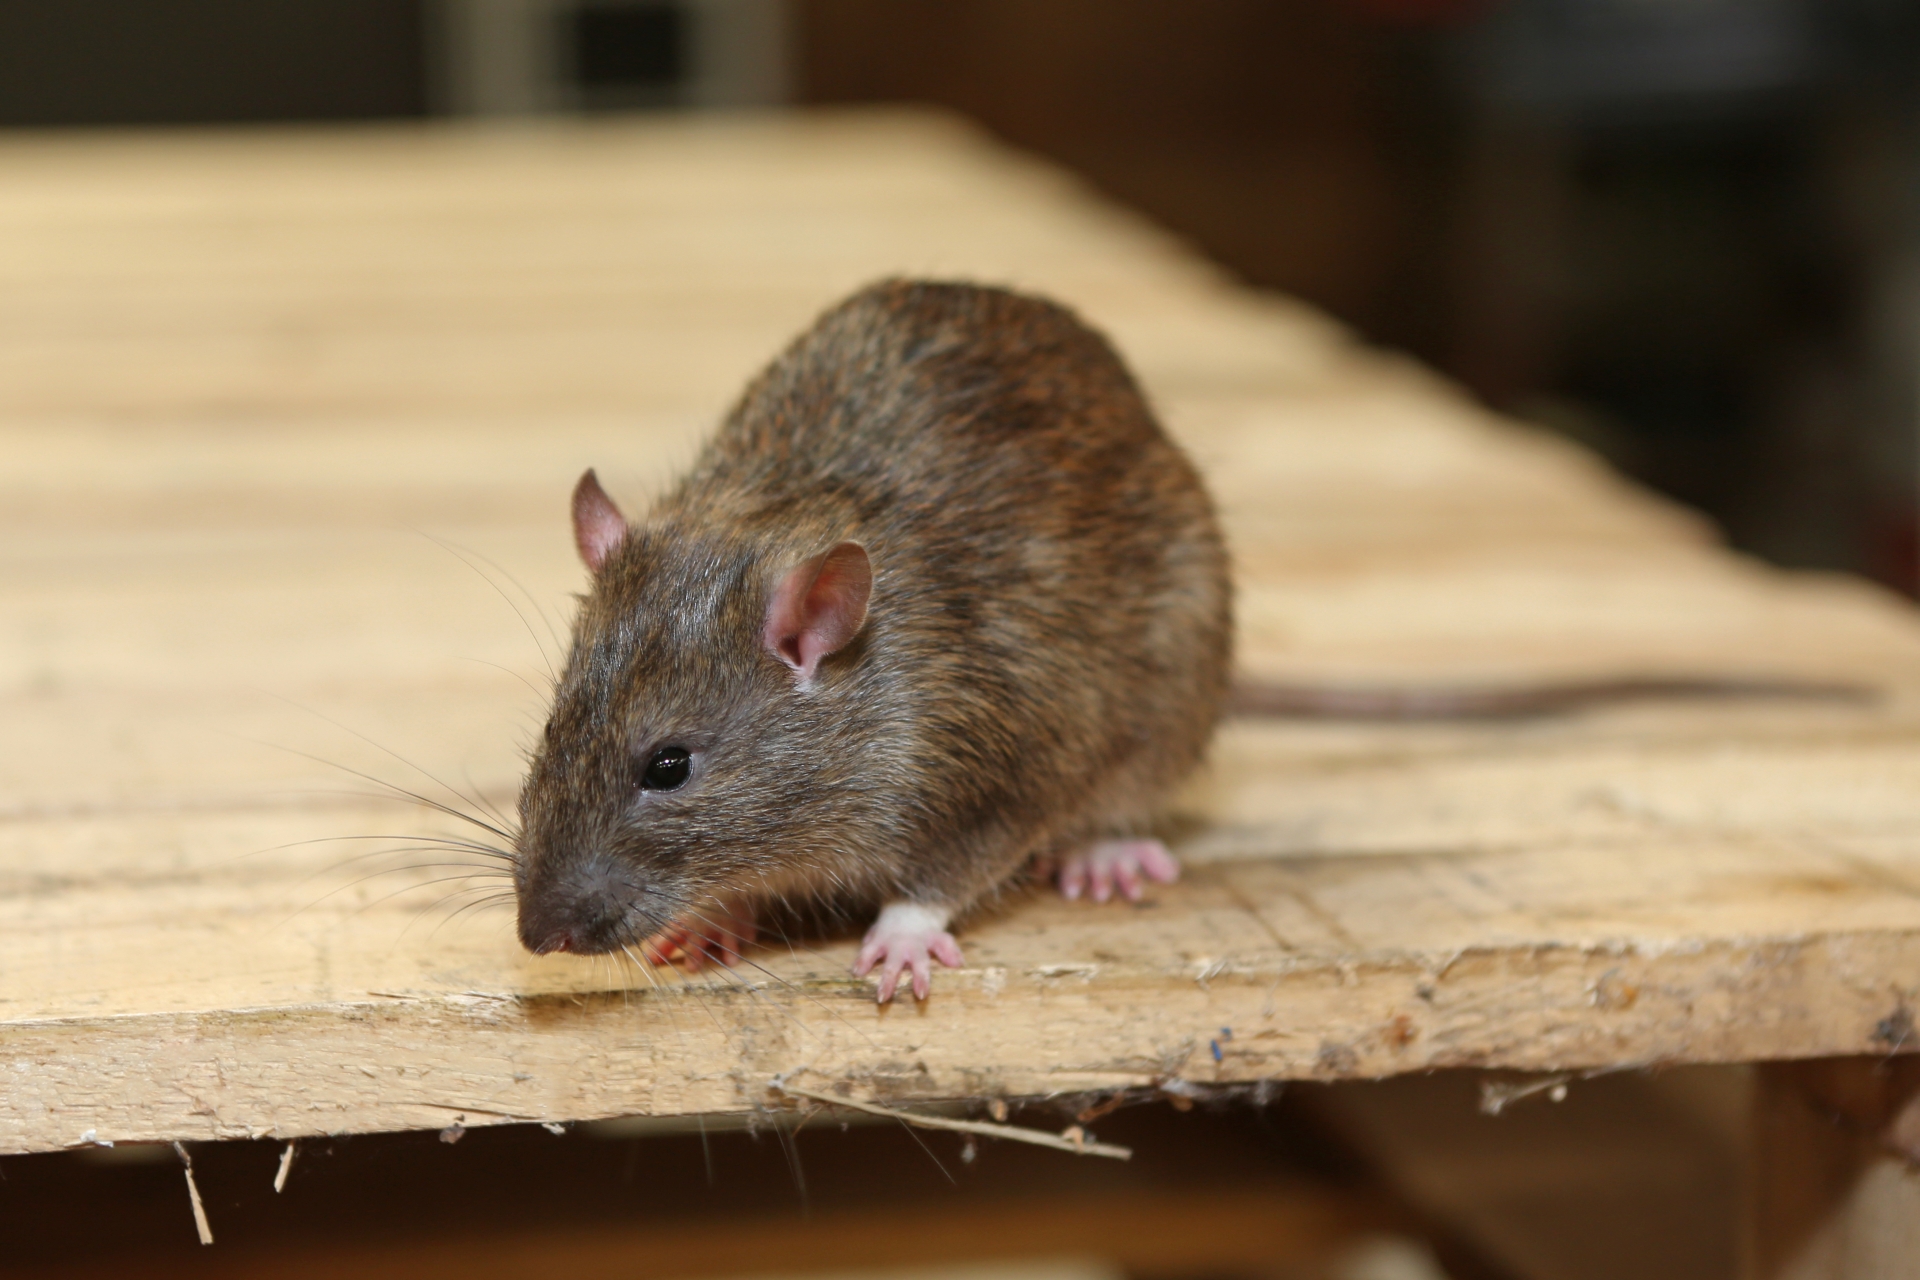 Rat Control, Pest Control in Clapton, E5. Call Now 020 8166 9746